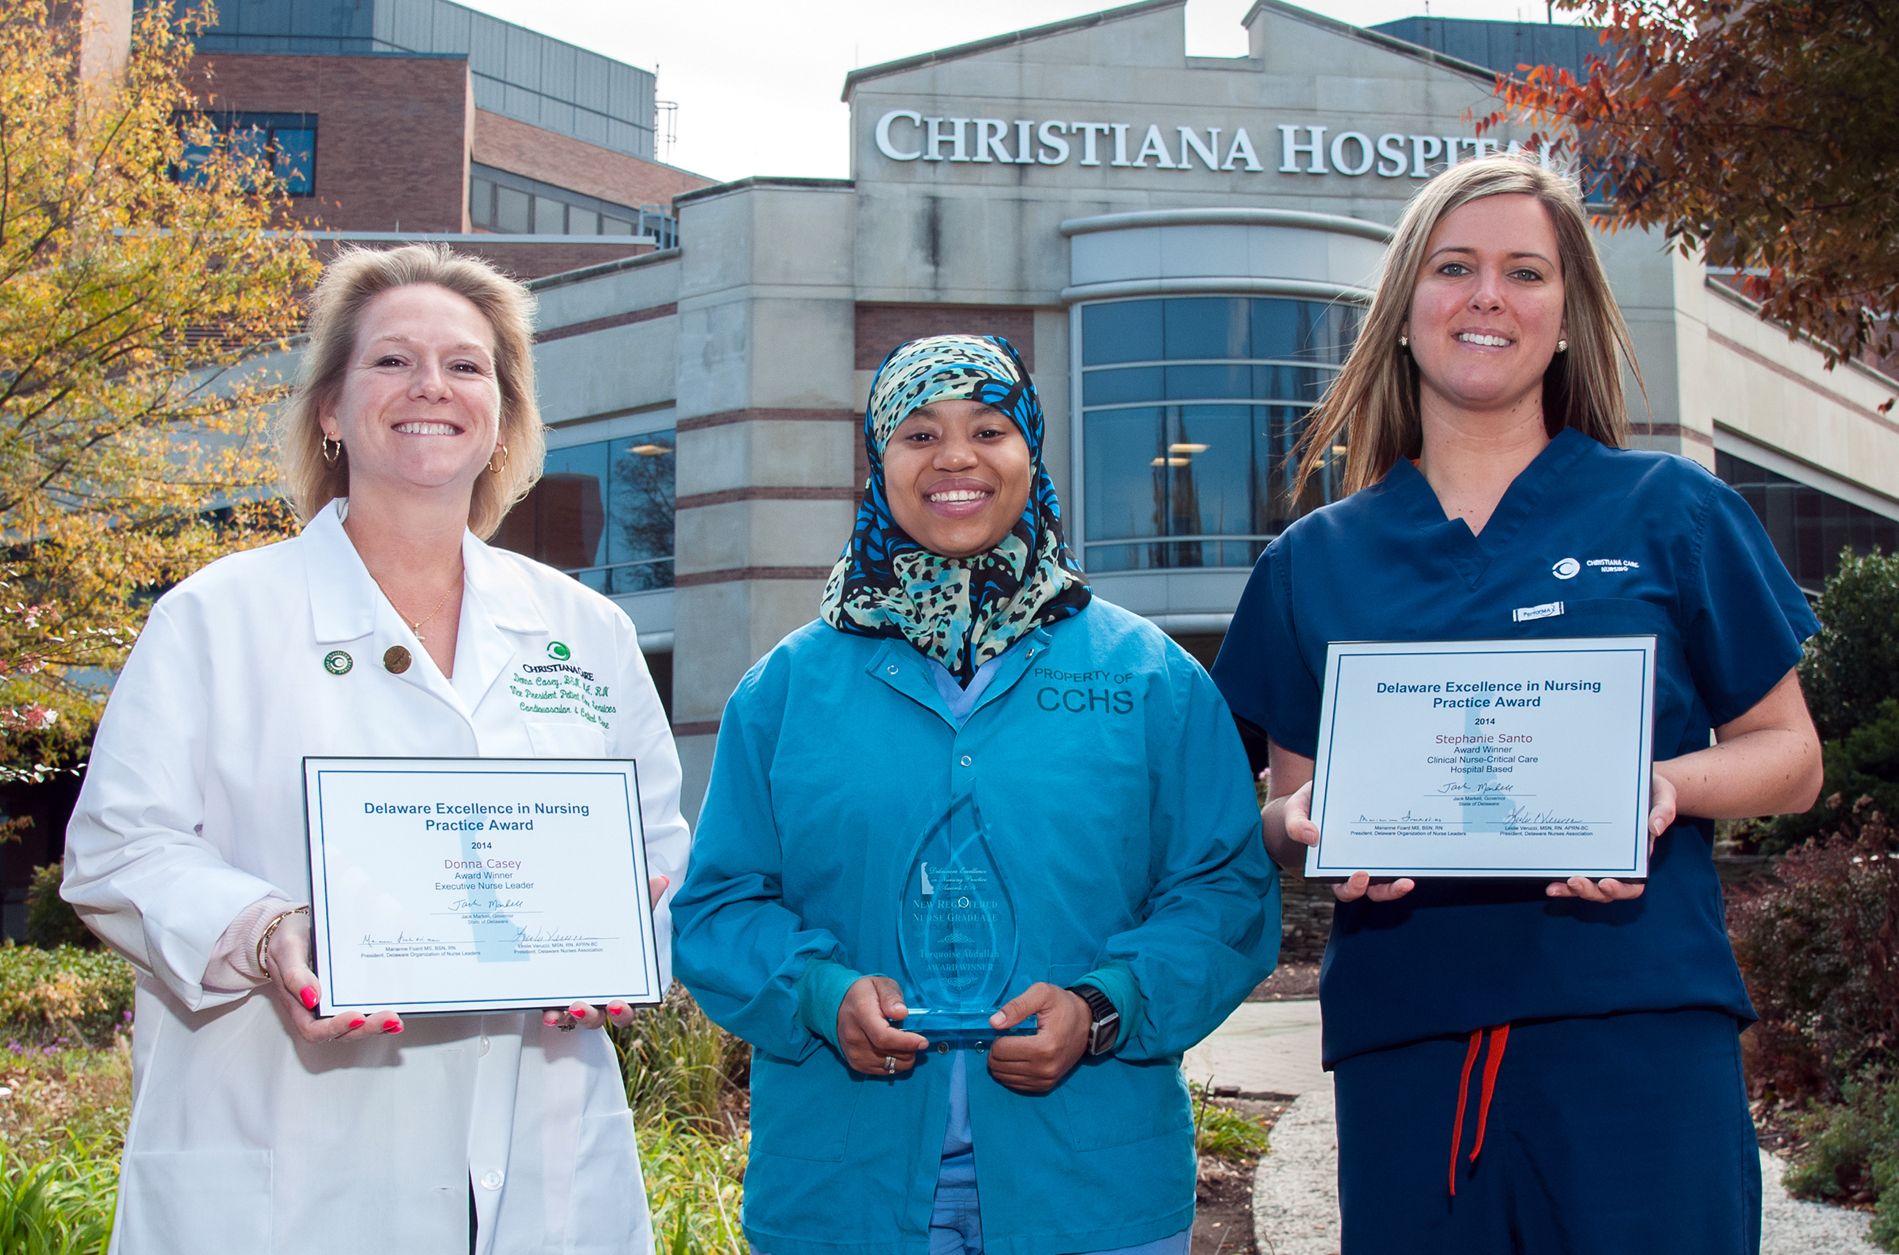 Christiana Care nurses accepting Delaware Excellence in Nursing Practice Awards